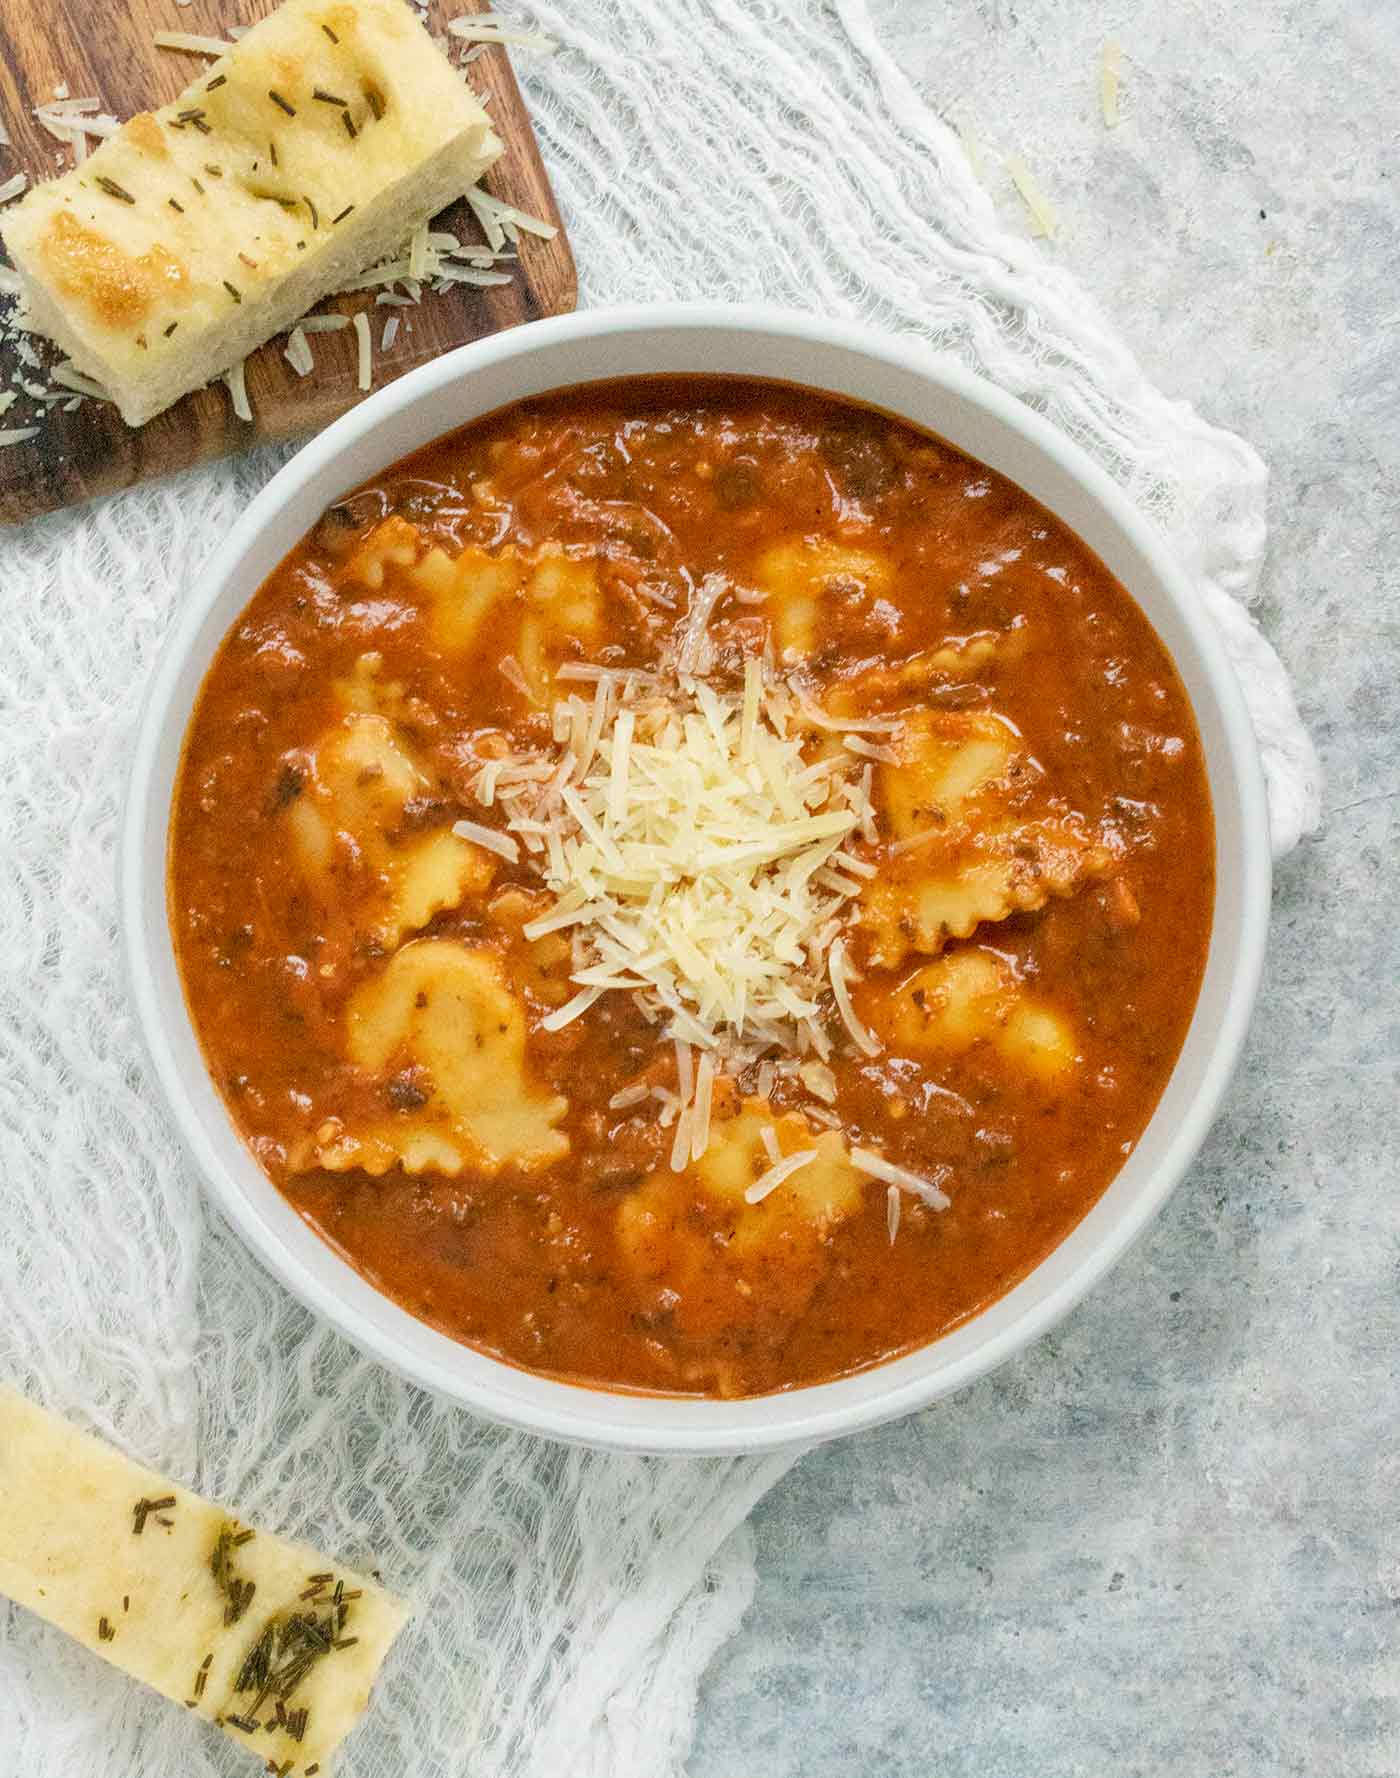 A bowl of Ravioli Soup with a side of focaccia slices.